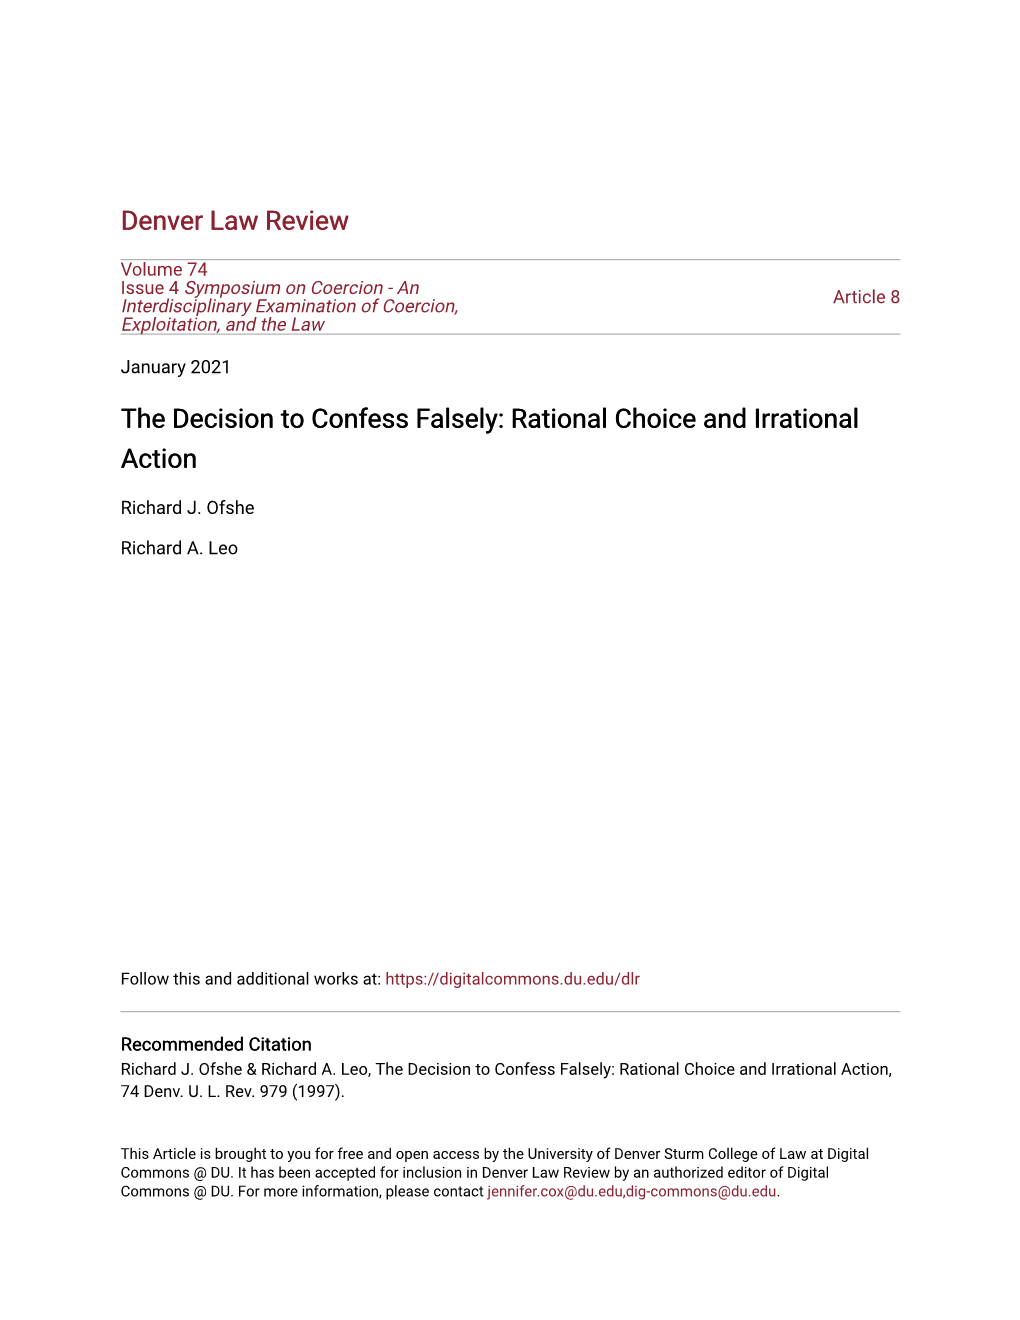 The Decision to Confess Falsely: Rational Choice and Irrational Action